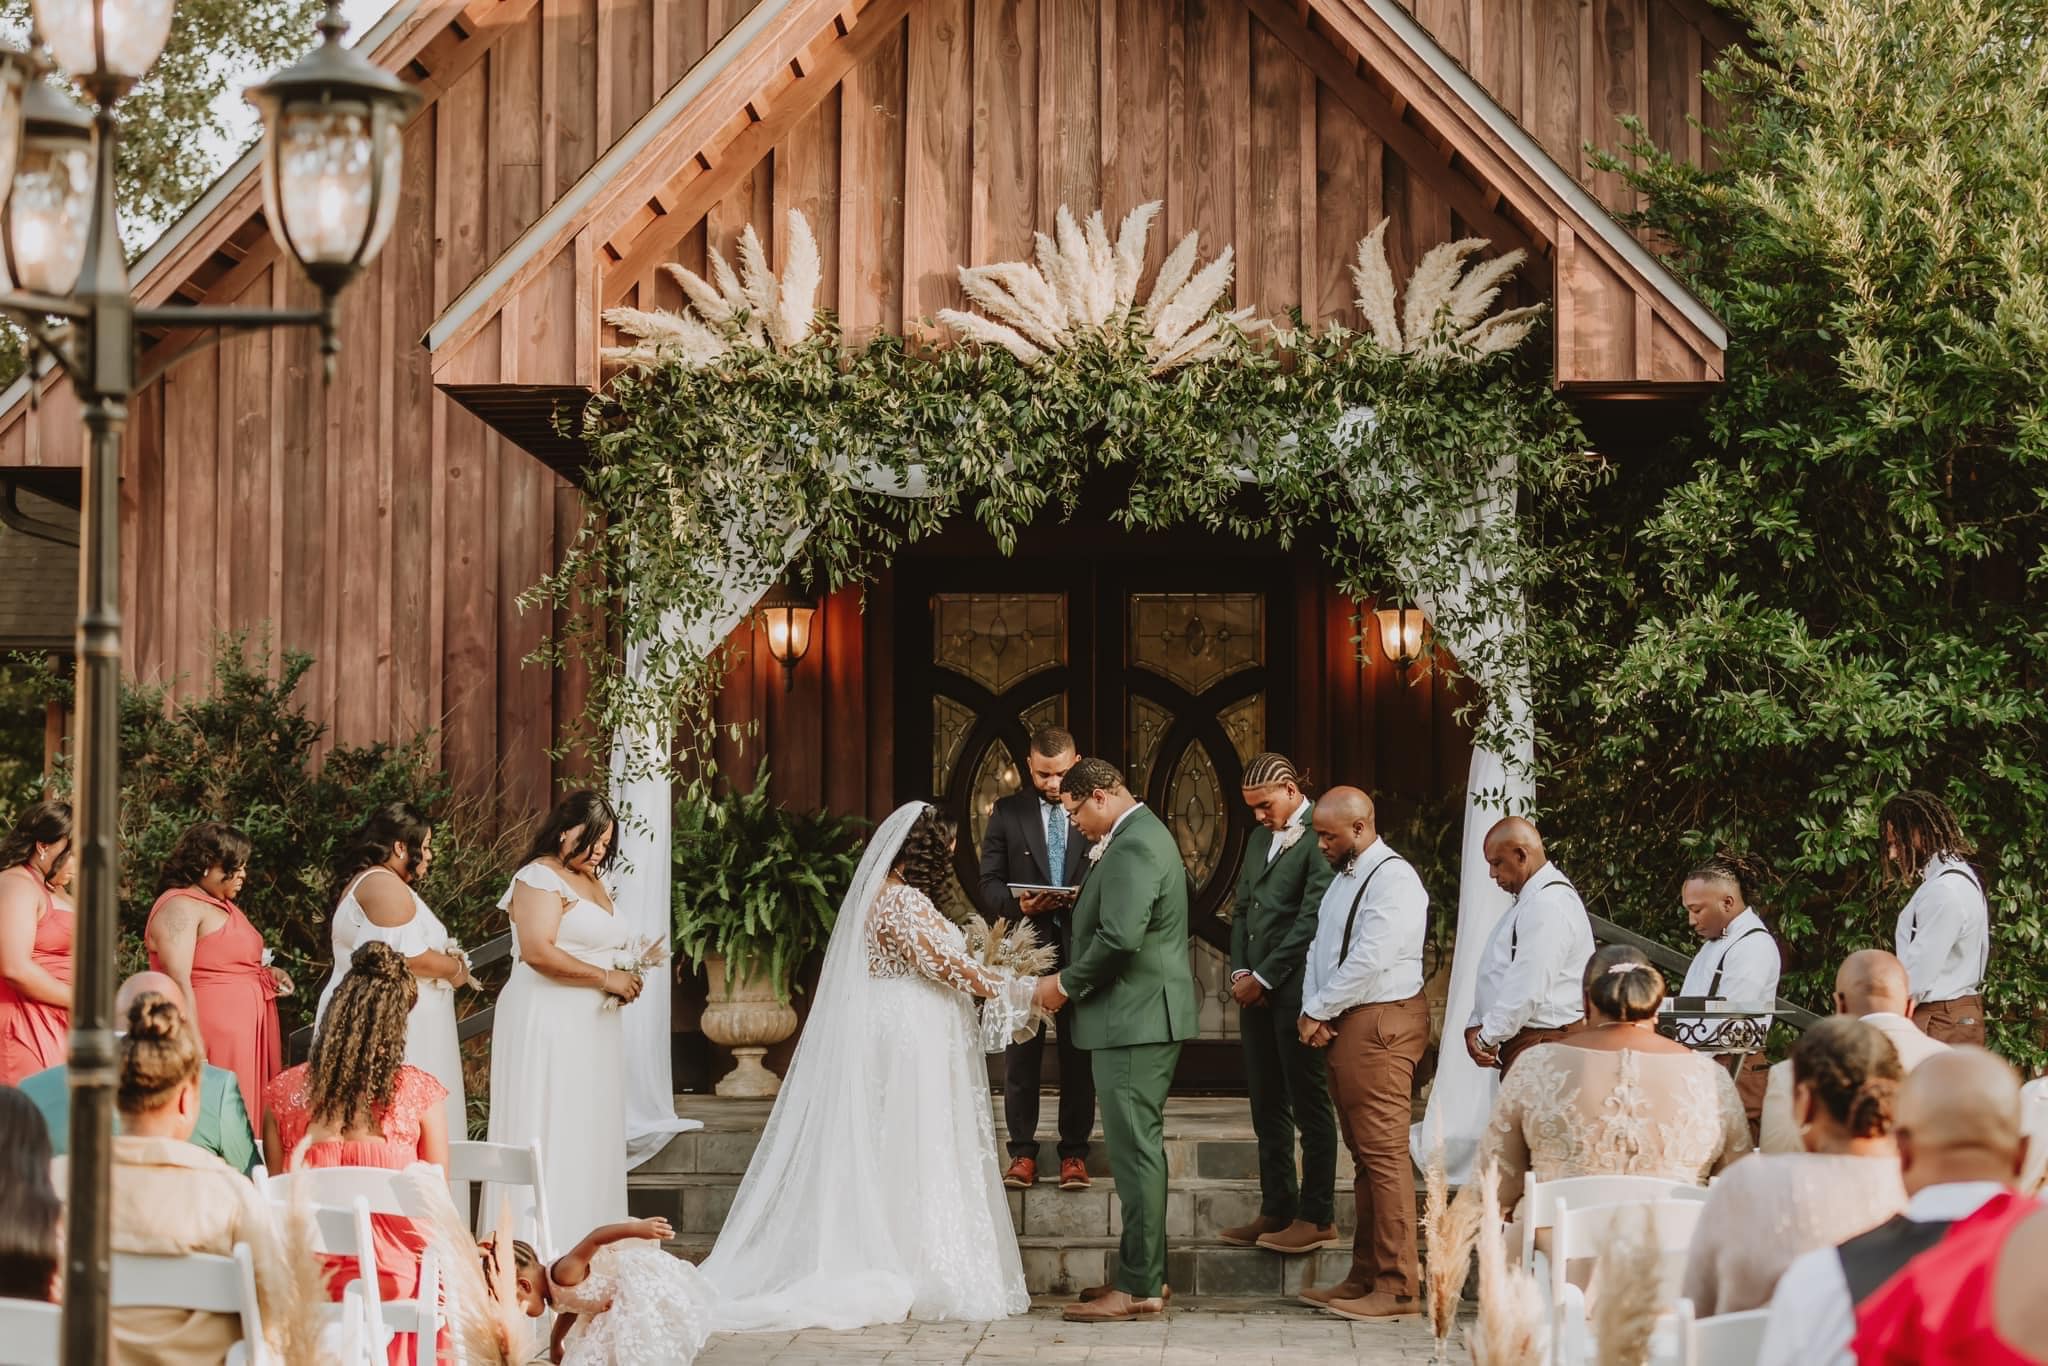 A couple getting married under an arch of greenery.